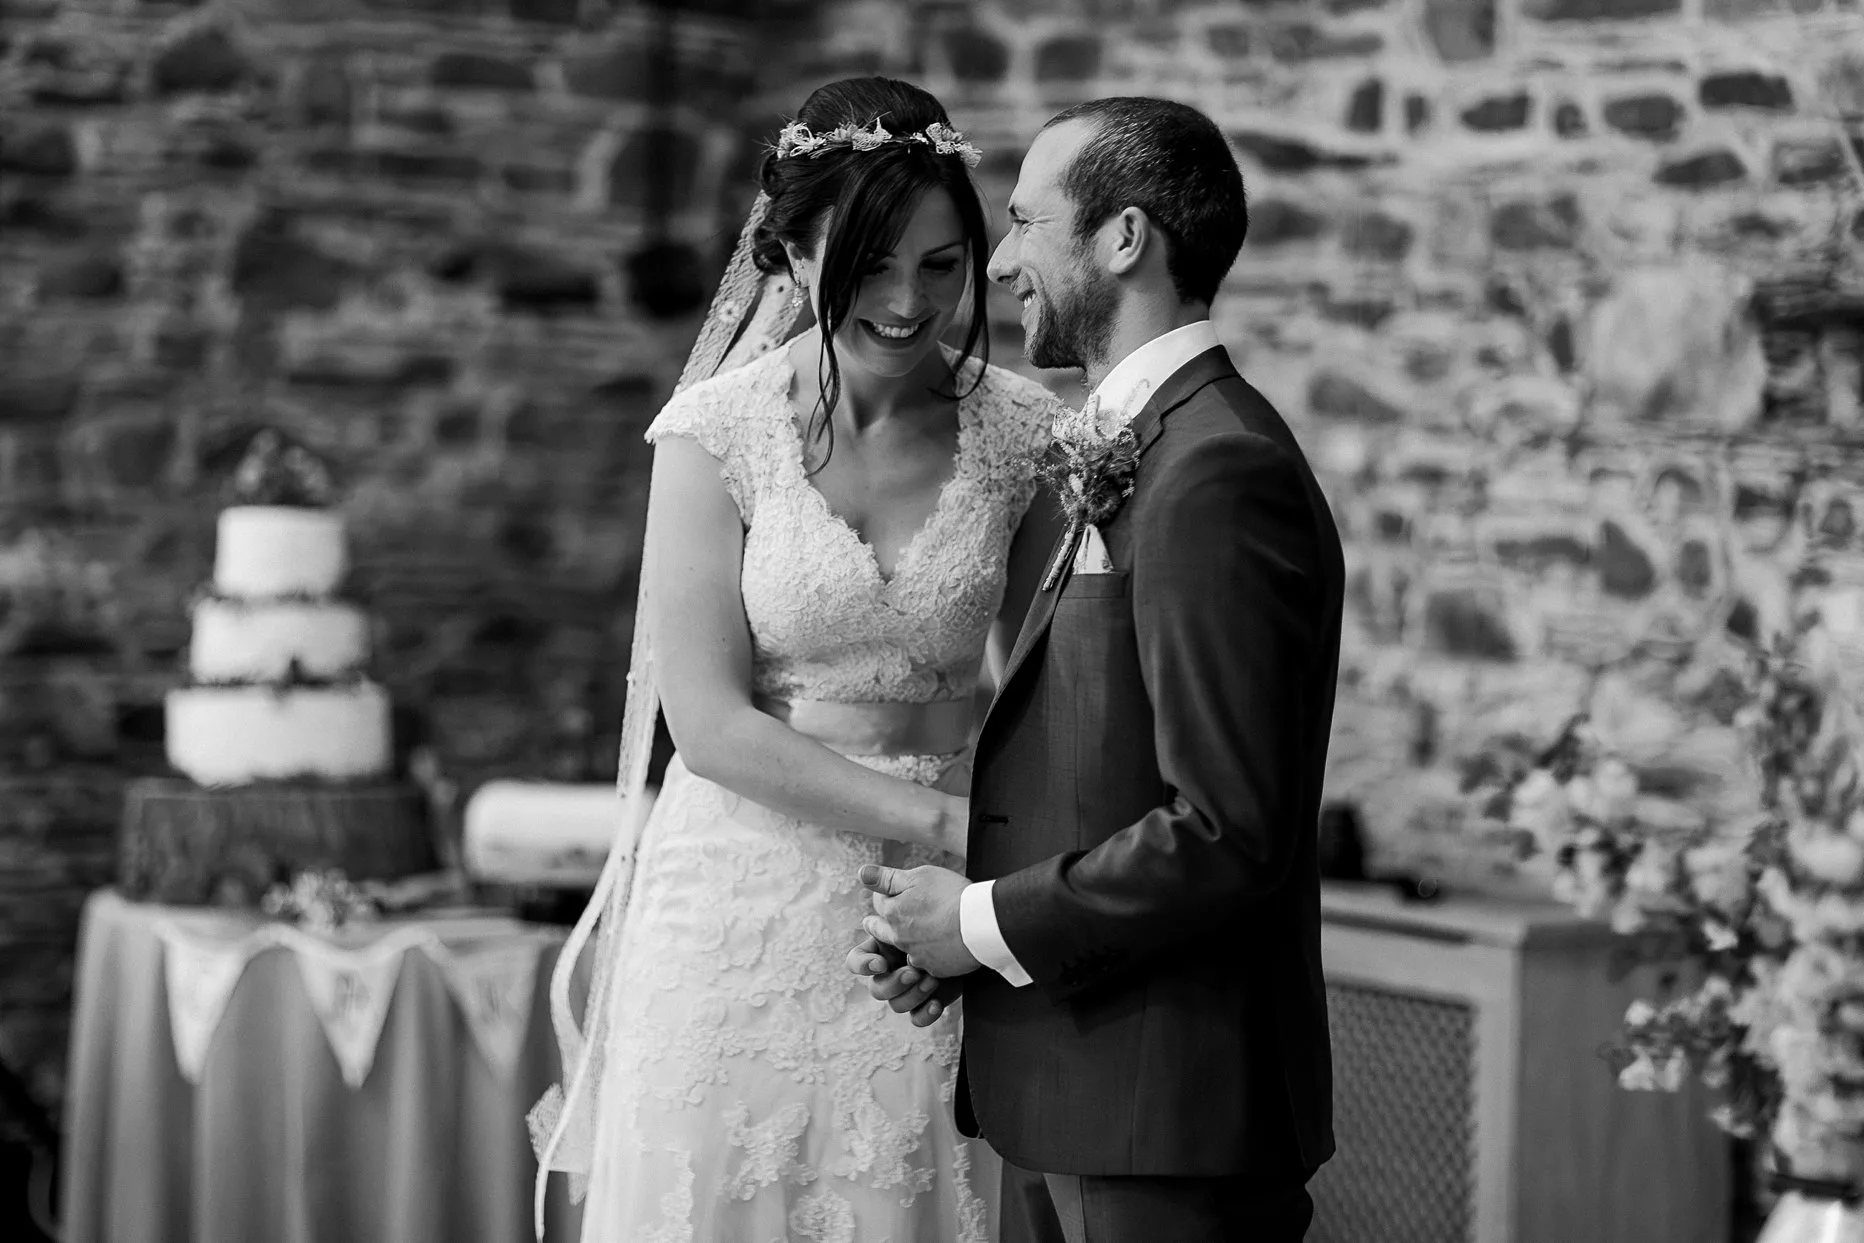 Natural black and white photograph of bride and groom talking and smiling during their wedding ceremony. They are stood in a rustic stone wedding barn.